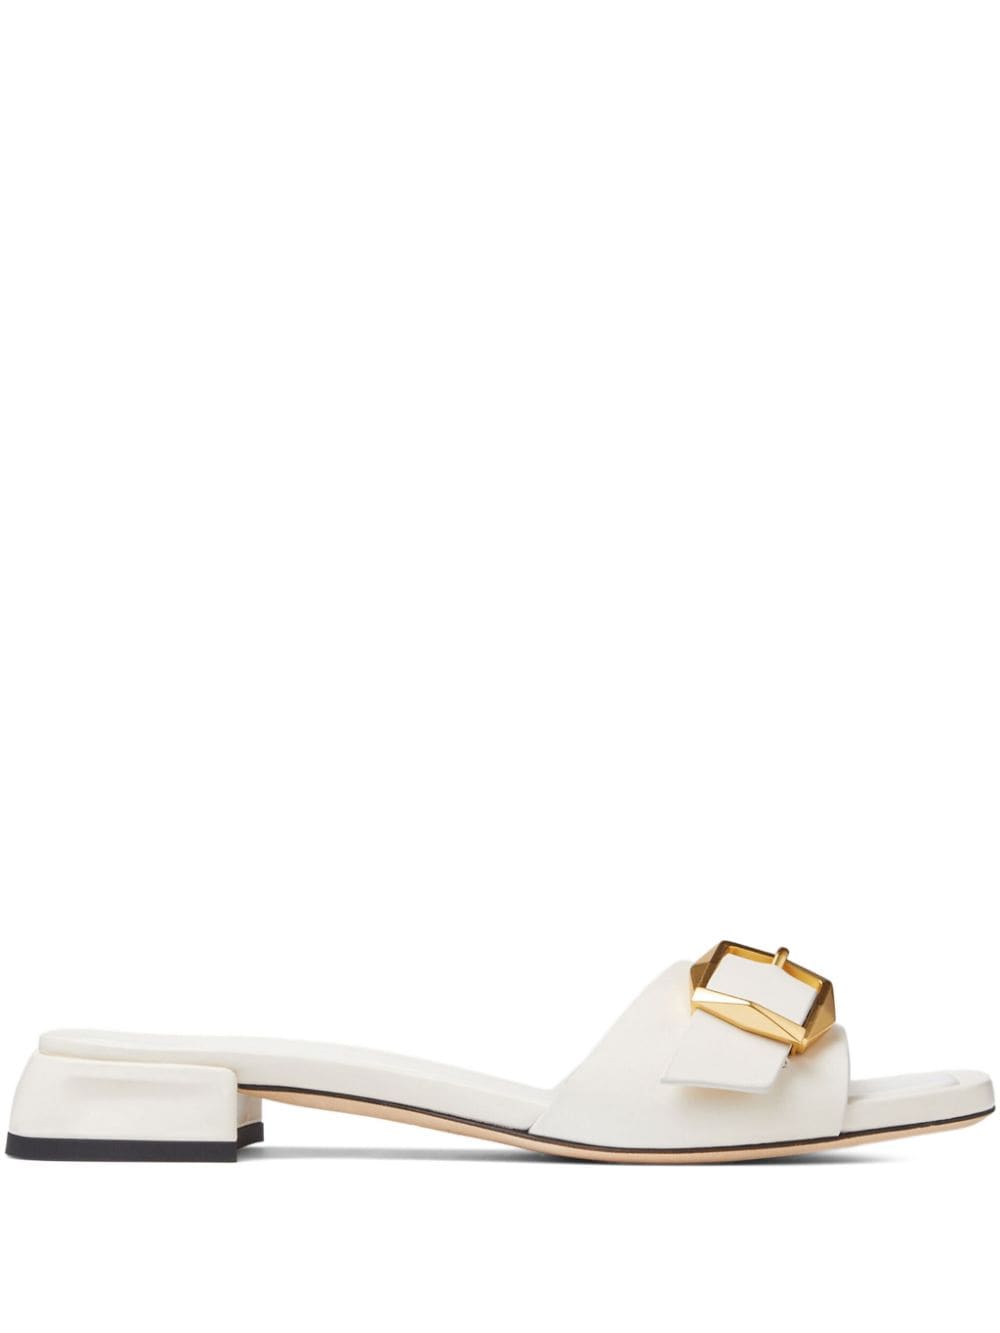 Jimmy Choo Hawke Buckled Leather Slides In Neutrals